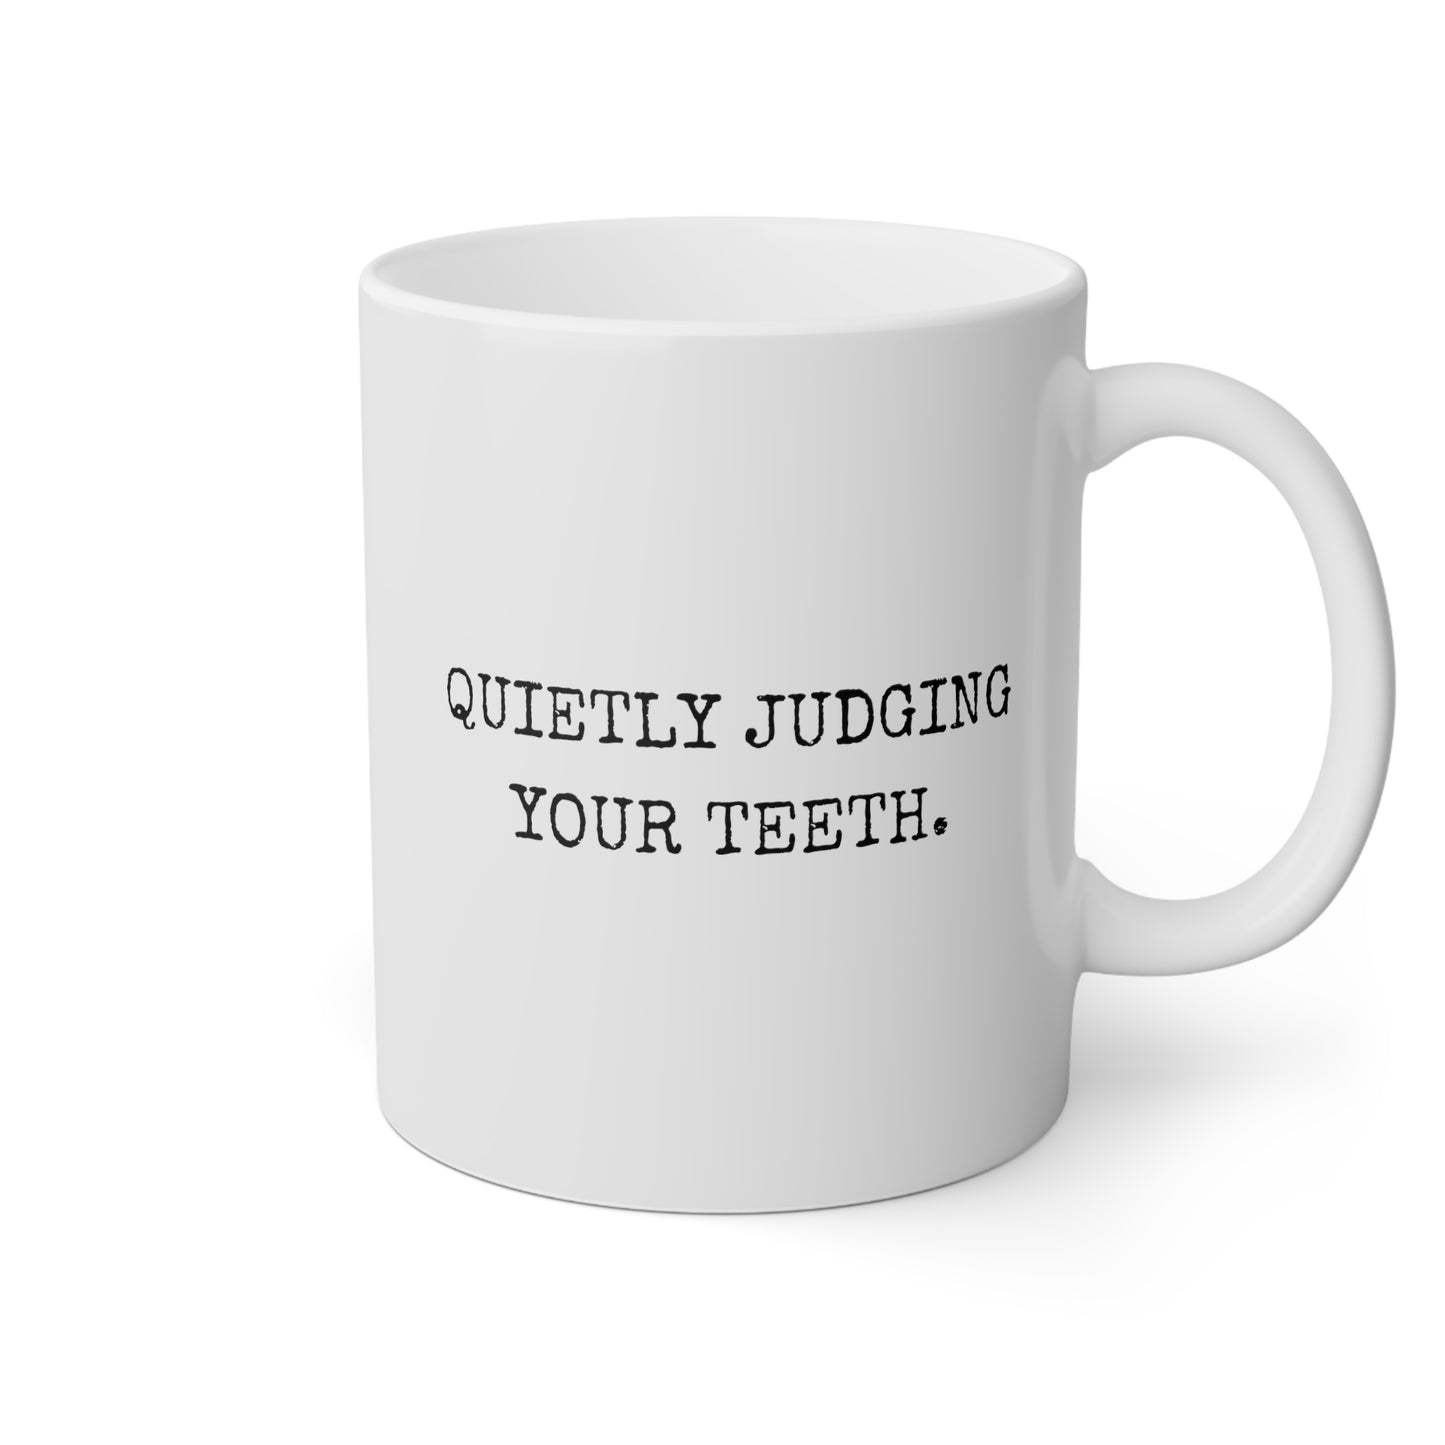 Quietly Judging Your Teeth 11oz white funny large coffee mug gift for dentist dental school graduation assistant orthodontist oral hygienist waveywares wavey wares wavywares wavy wares